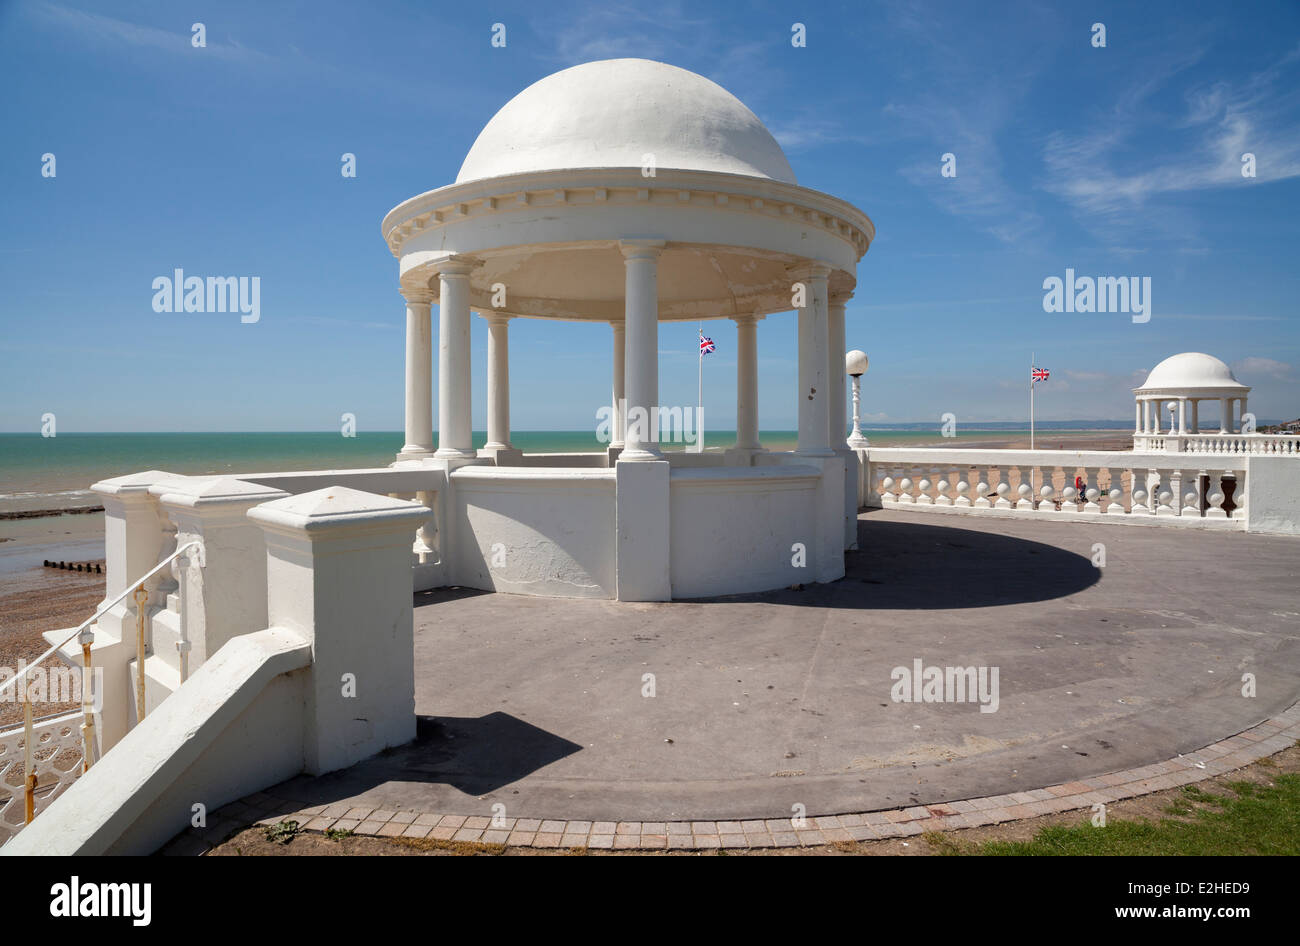 Colonnades at the De la Warr Pavilion, Bexhill-on-Sea, East Sussex, England, United Kingdom, Europe Stock Photo